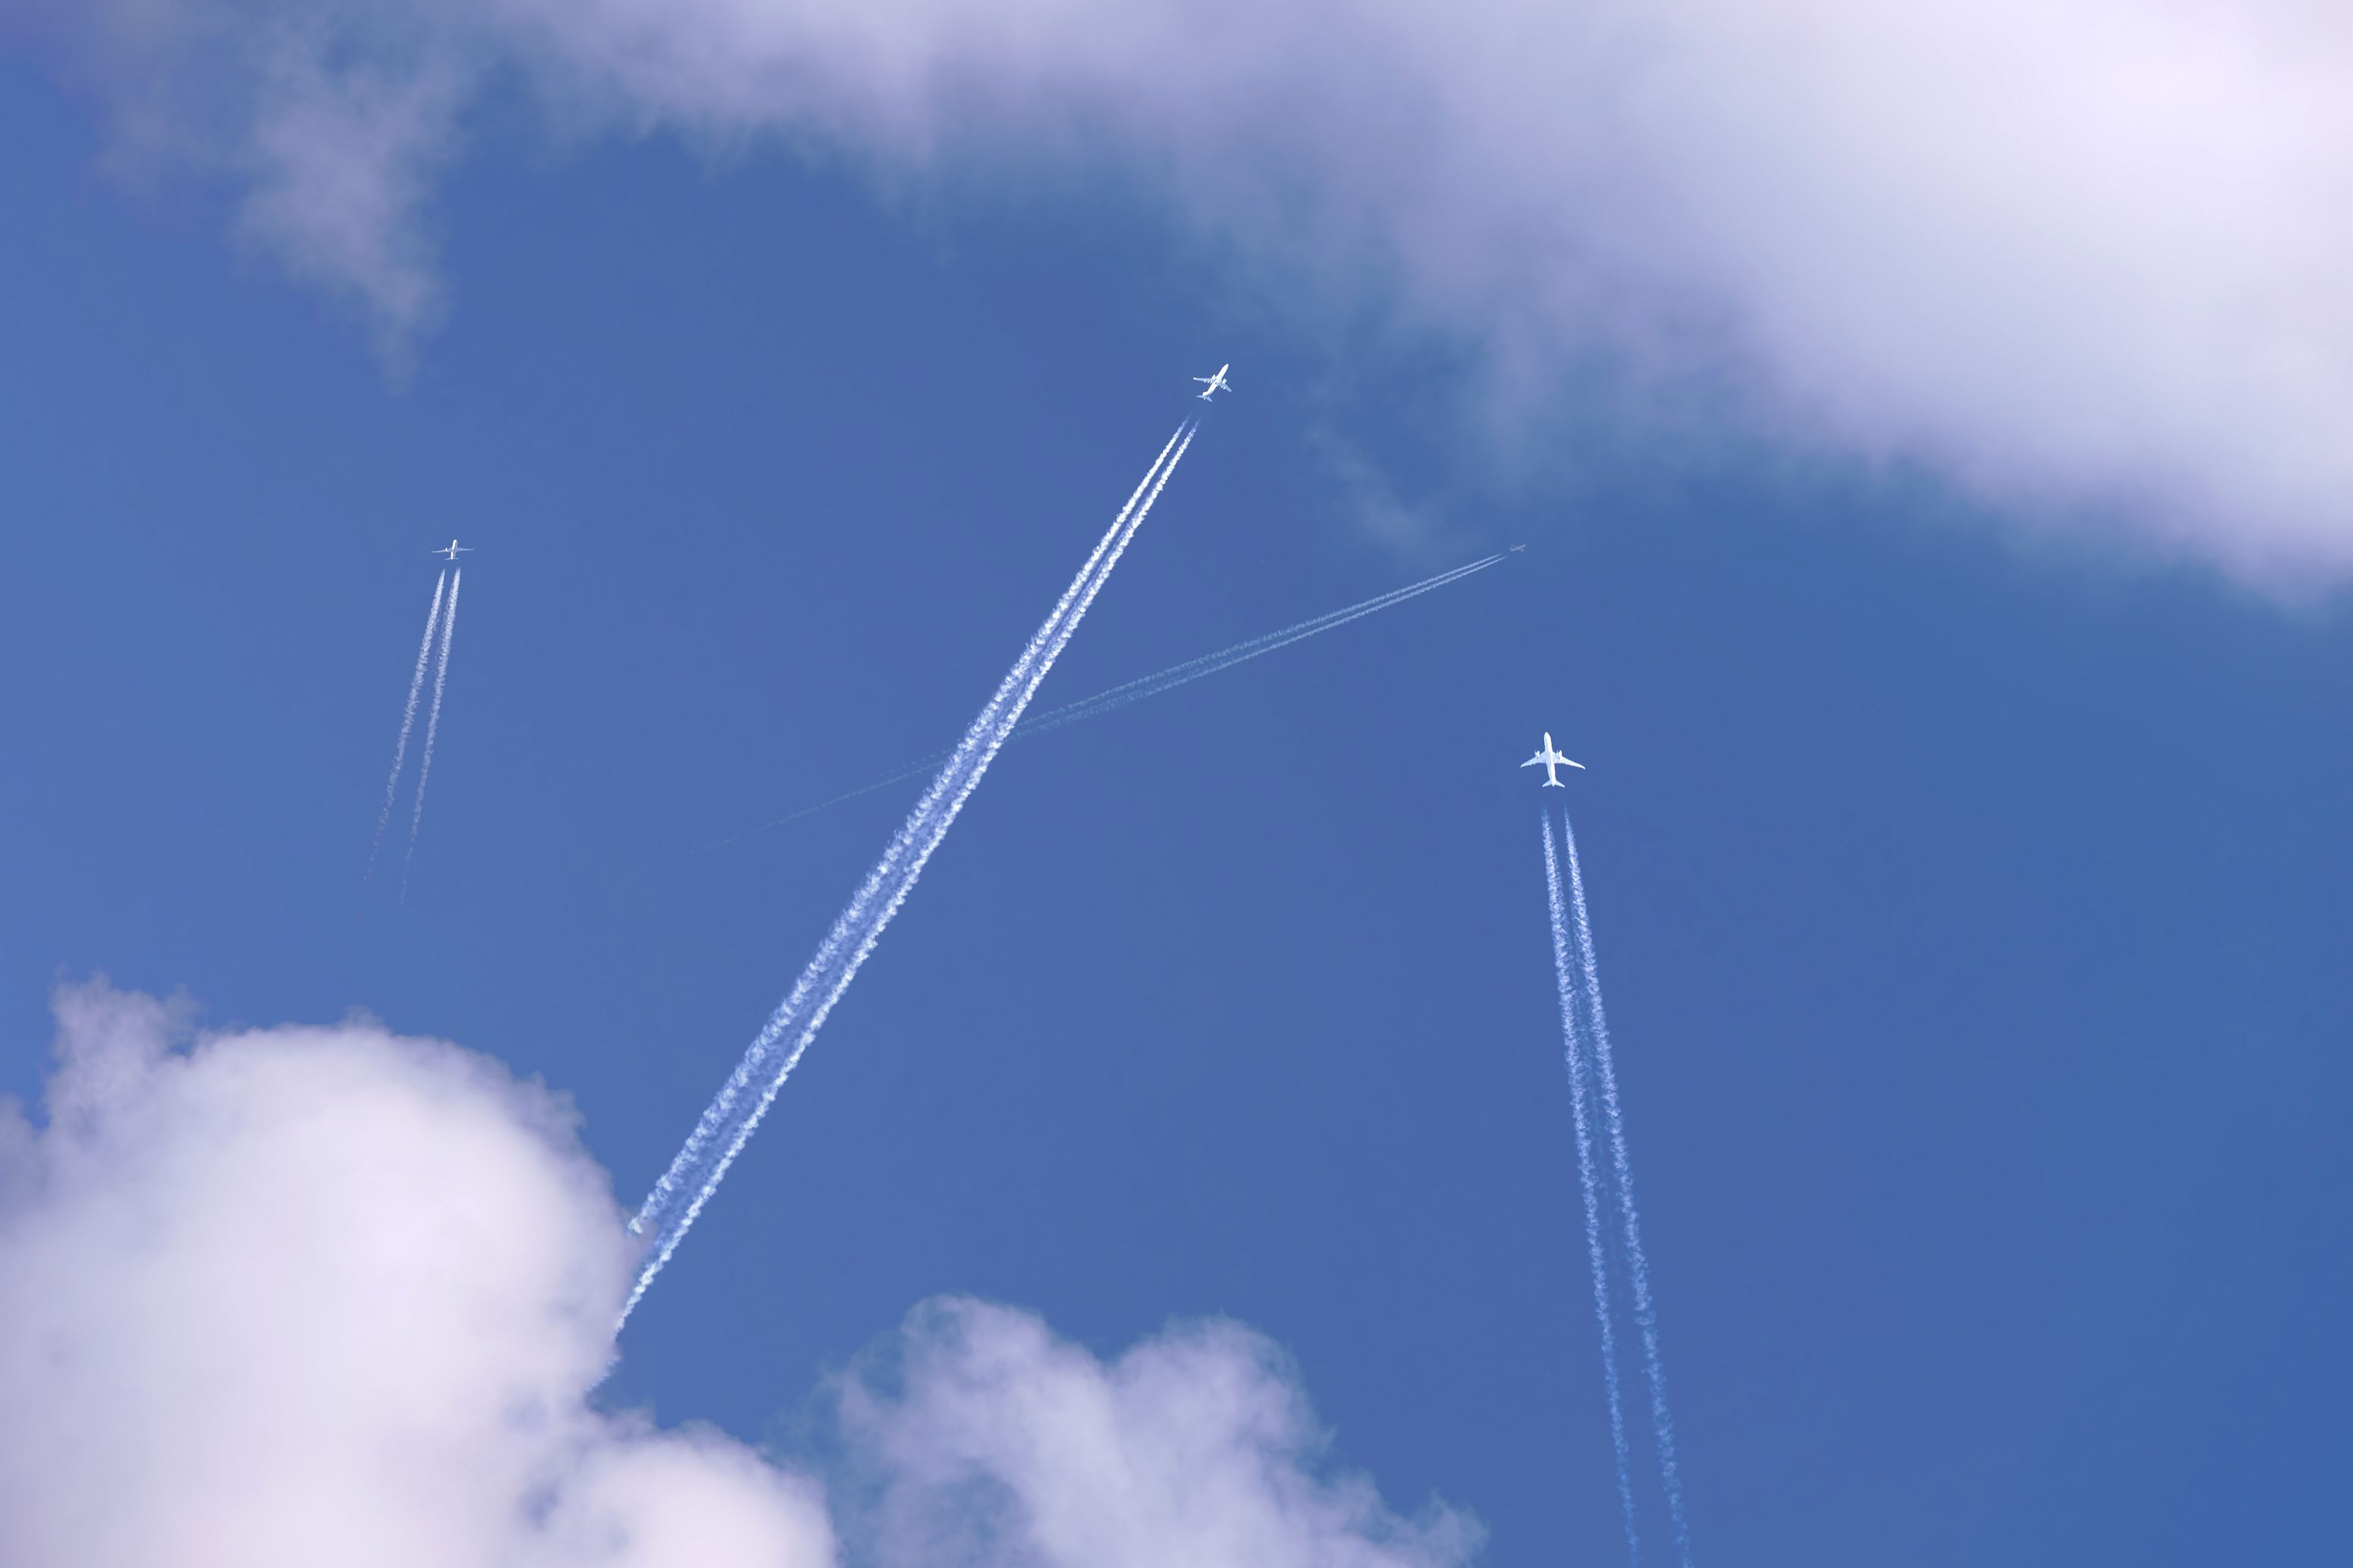 Planes passing on random routes far above.